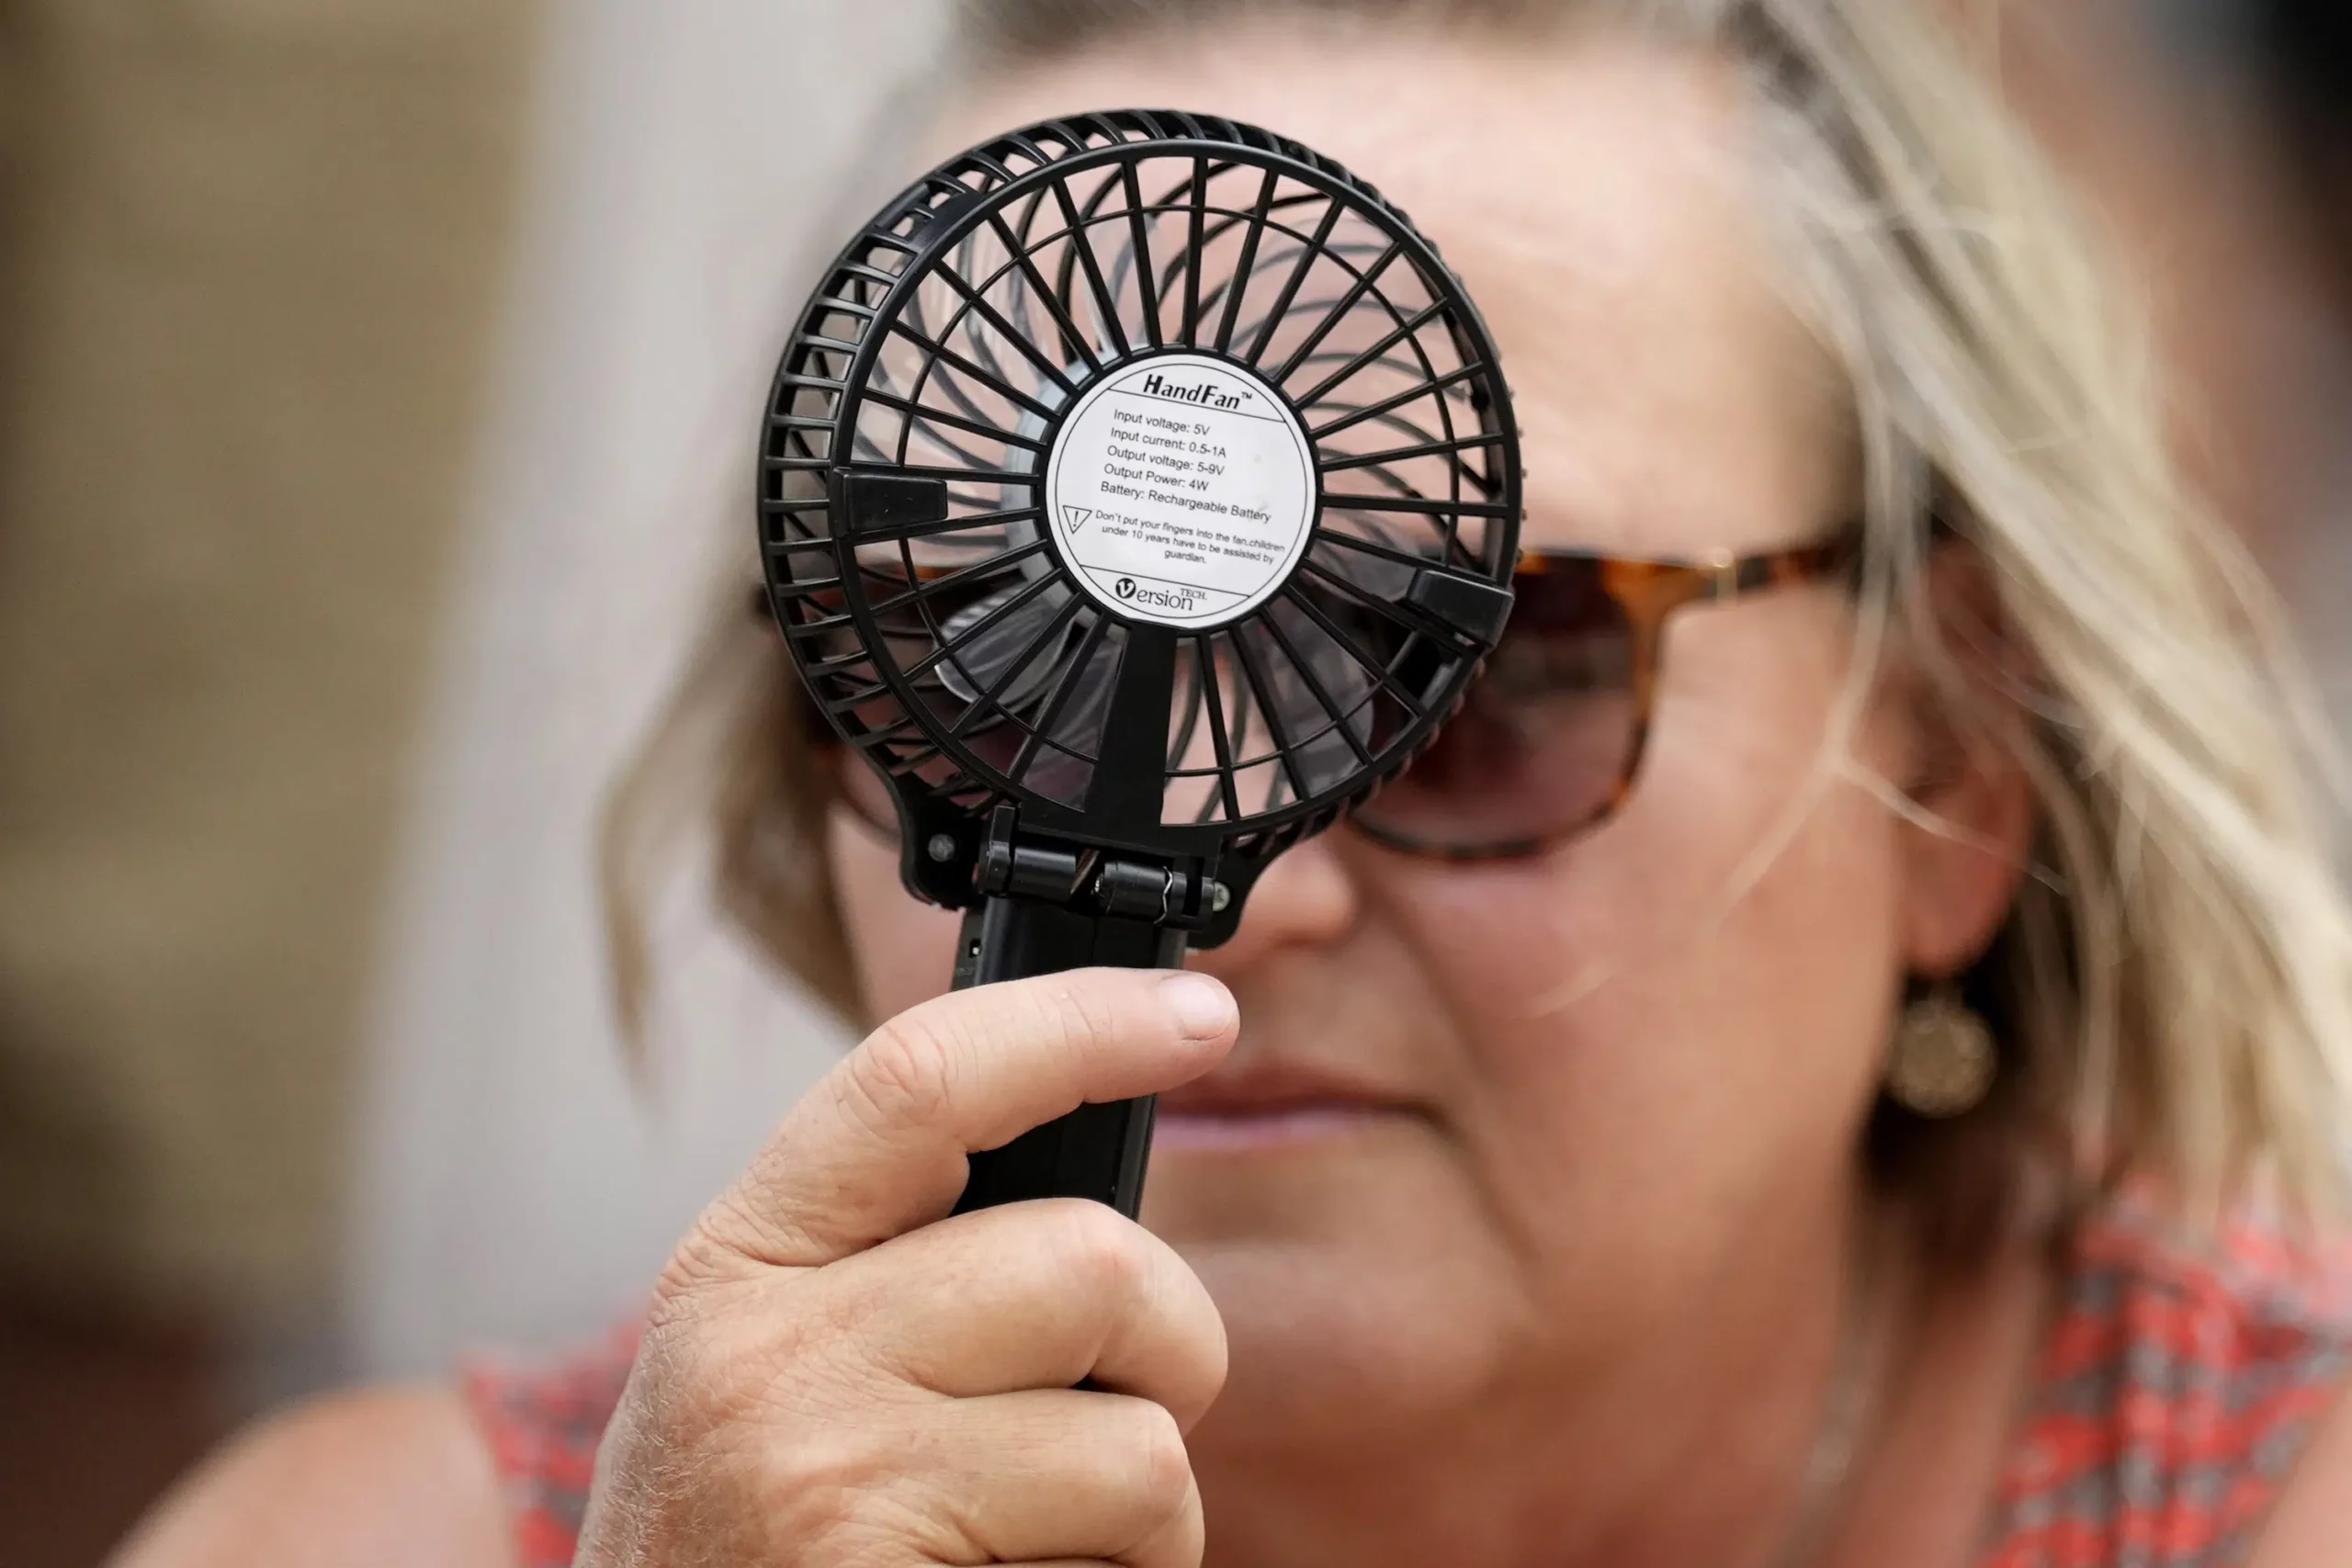 TX power grid says cut electricity use as heat wave scorches…